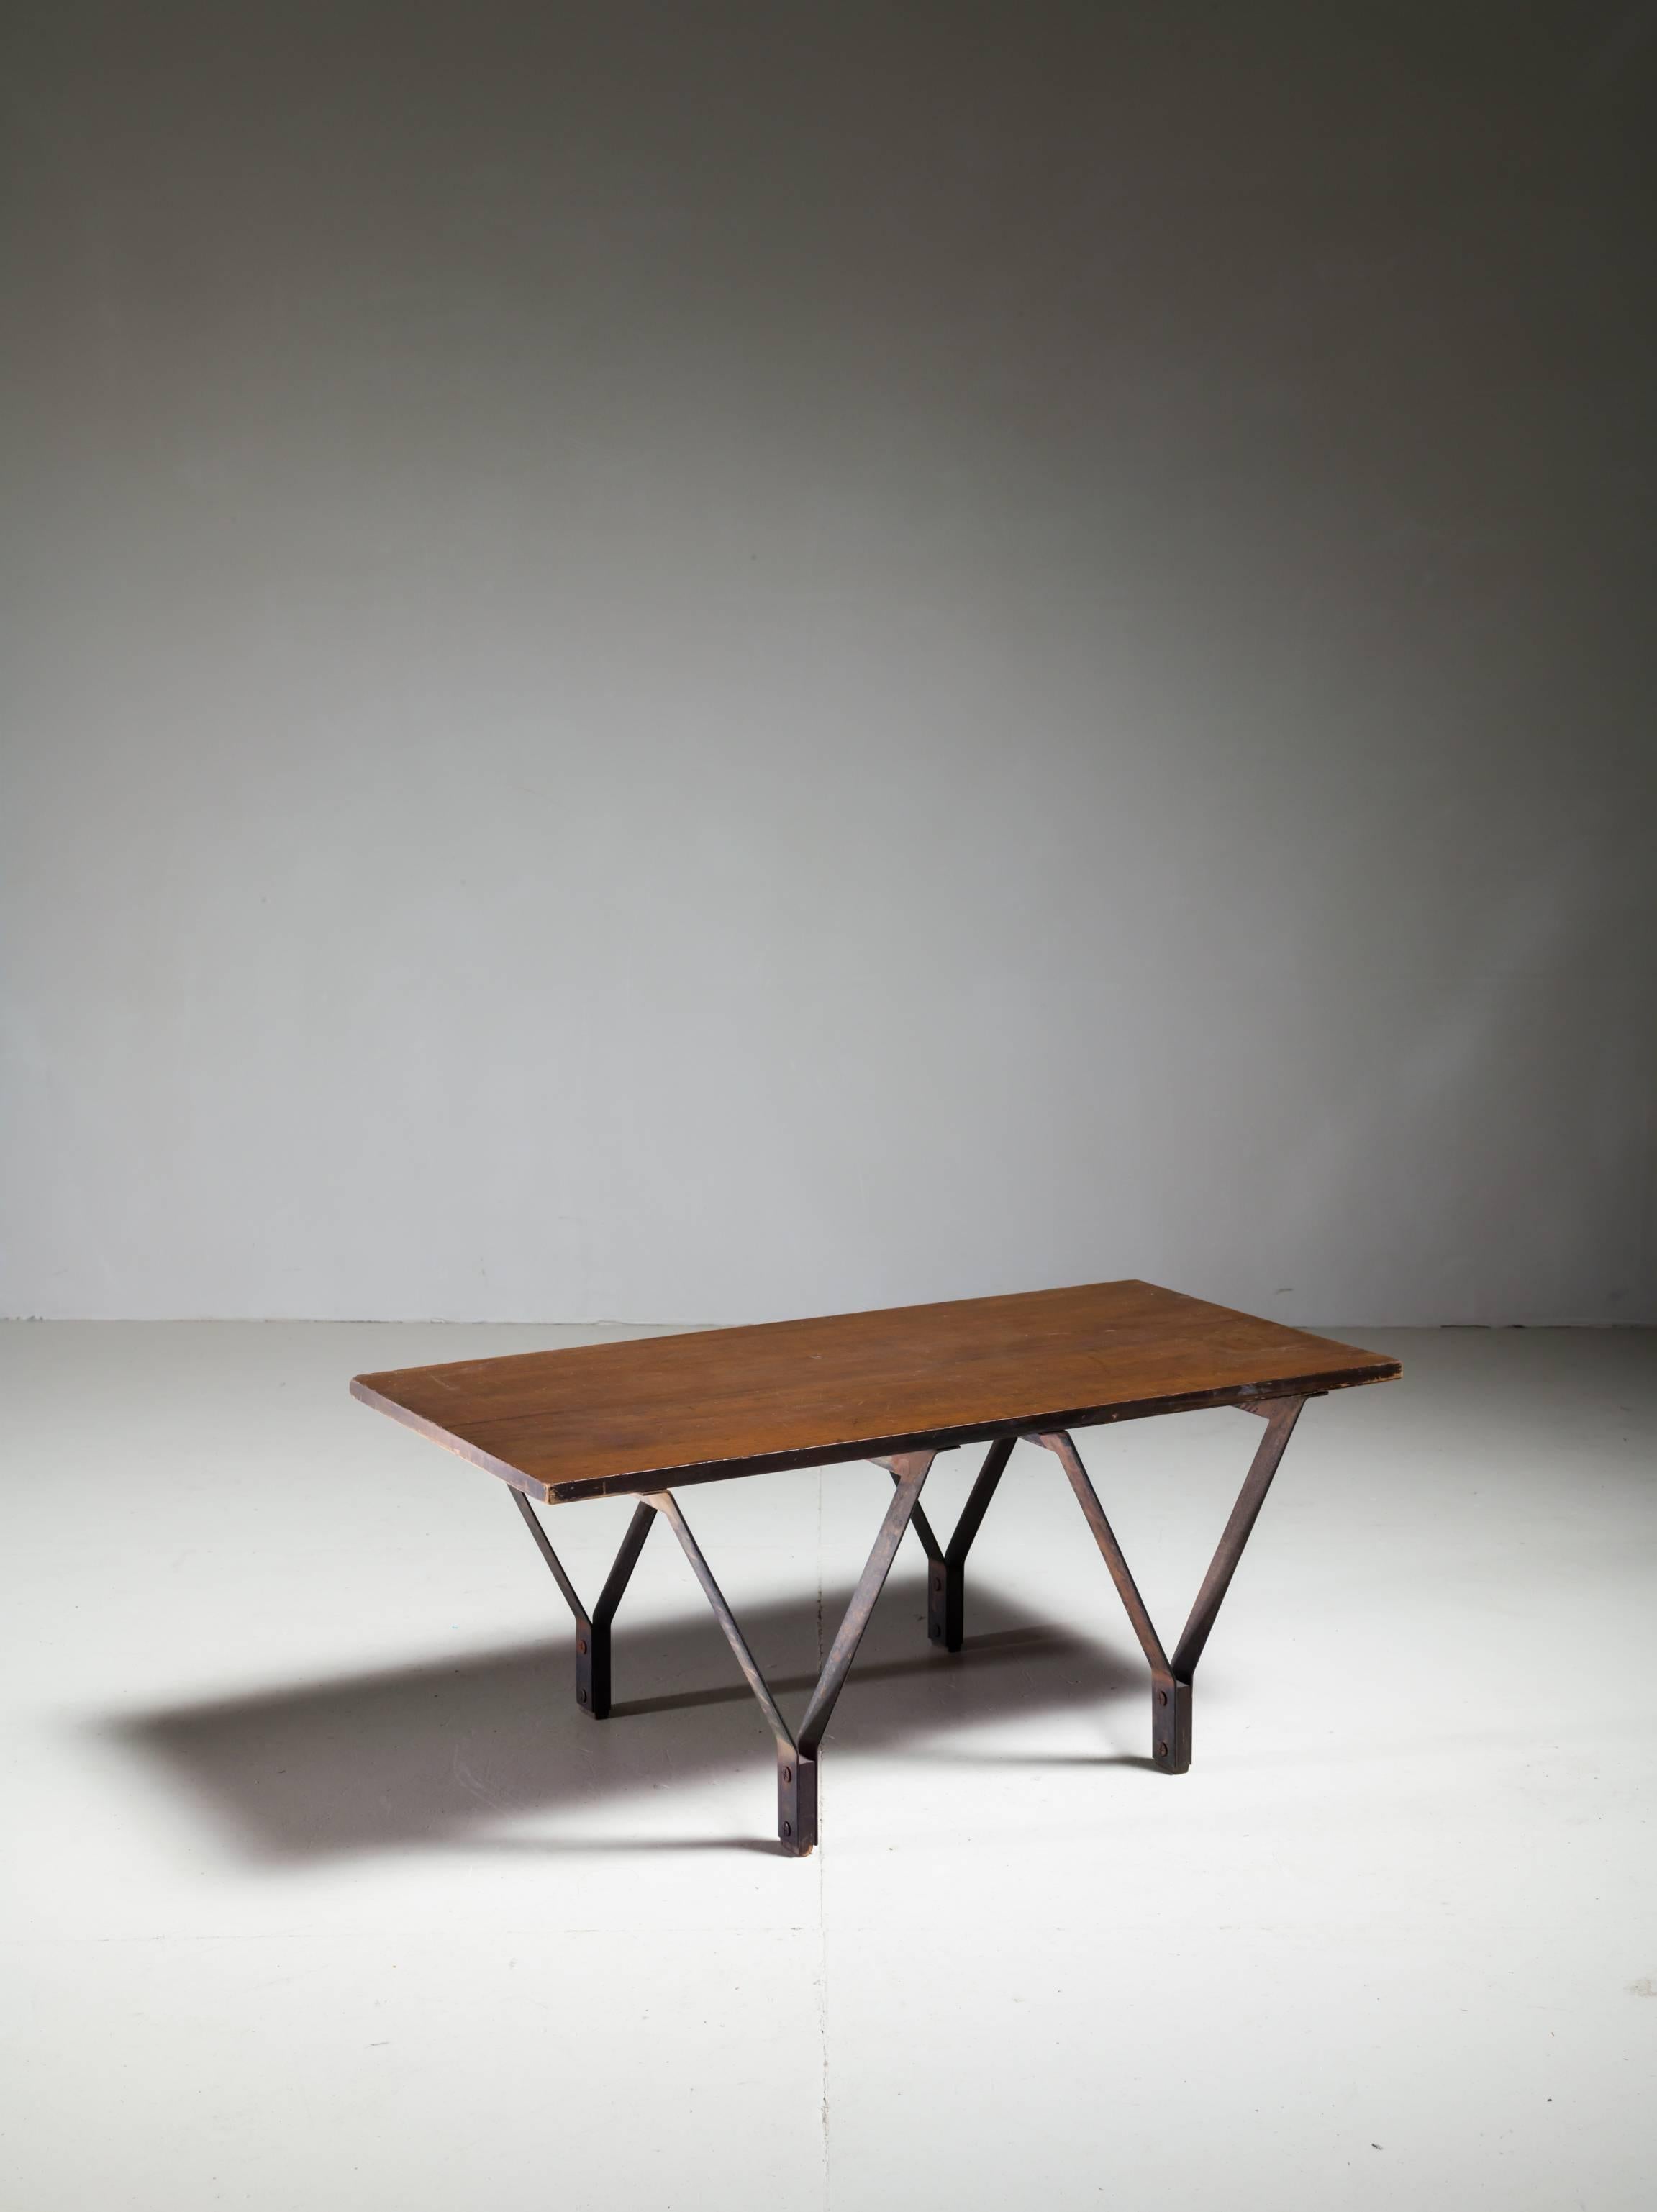 A rectangular, low coffee table made of a wooden top resting on four V-shaped metal legs. The legs have wooden feet, fixed between the metal.
* This piece is offered to you by Bloomberry, Amsterdam *

The legs show a strong resemblance to the work